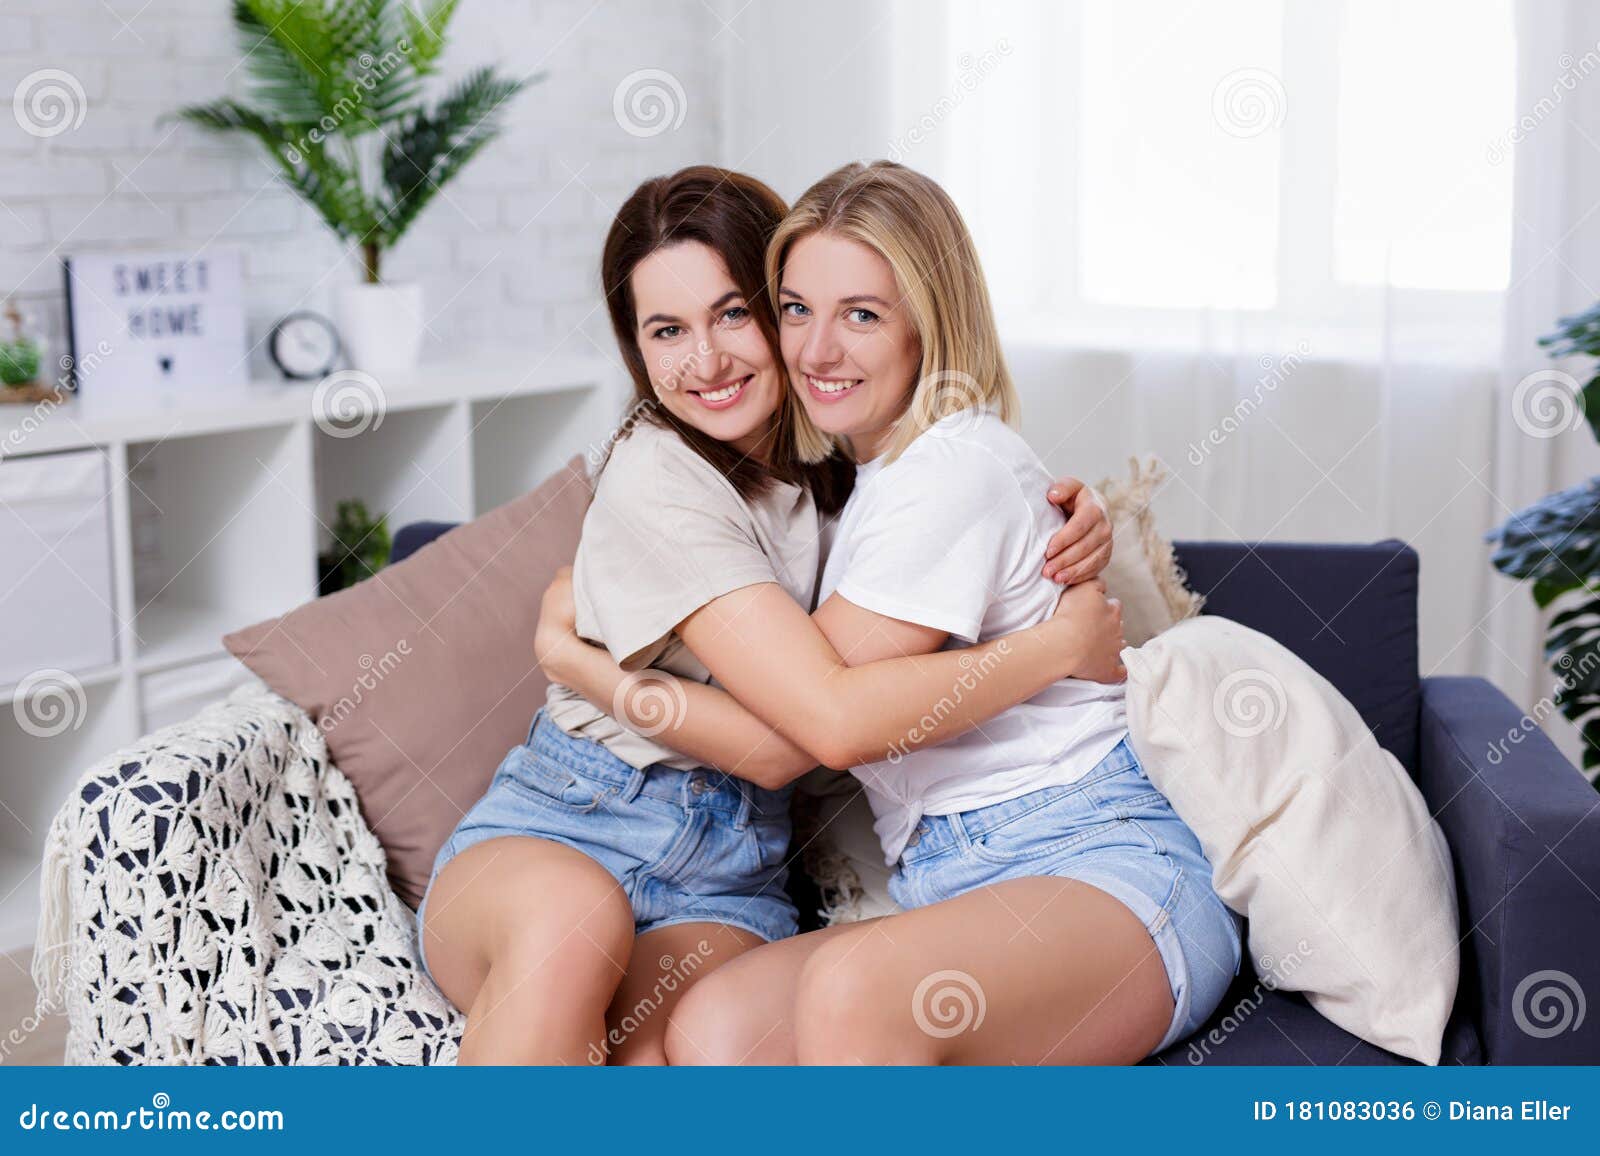 Female Friendship And Love Concept Two Young Female Friends Hugging 